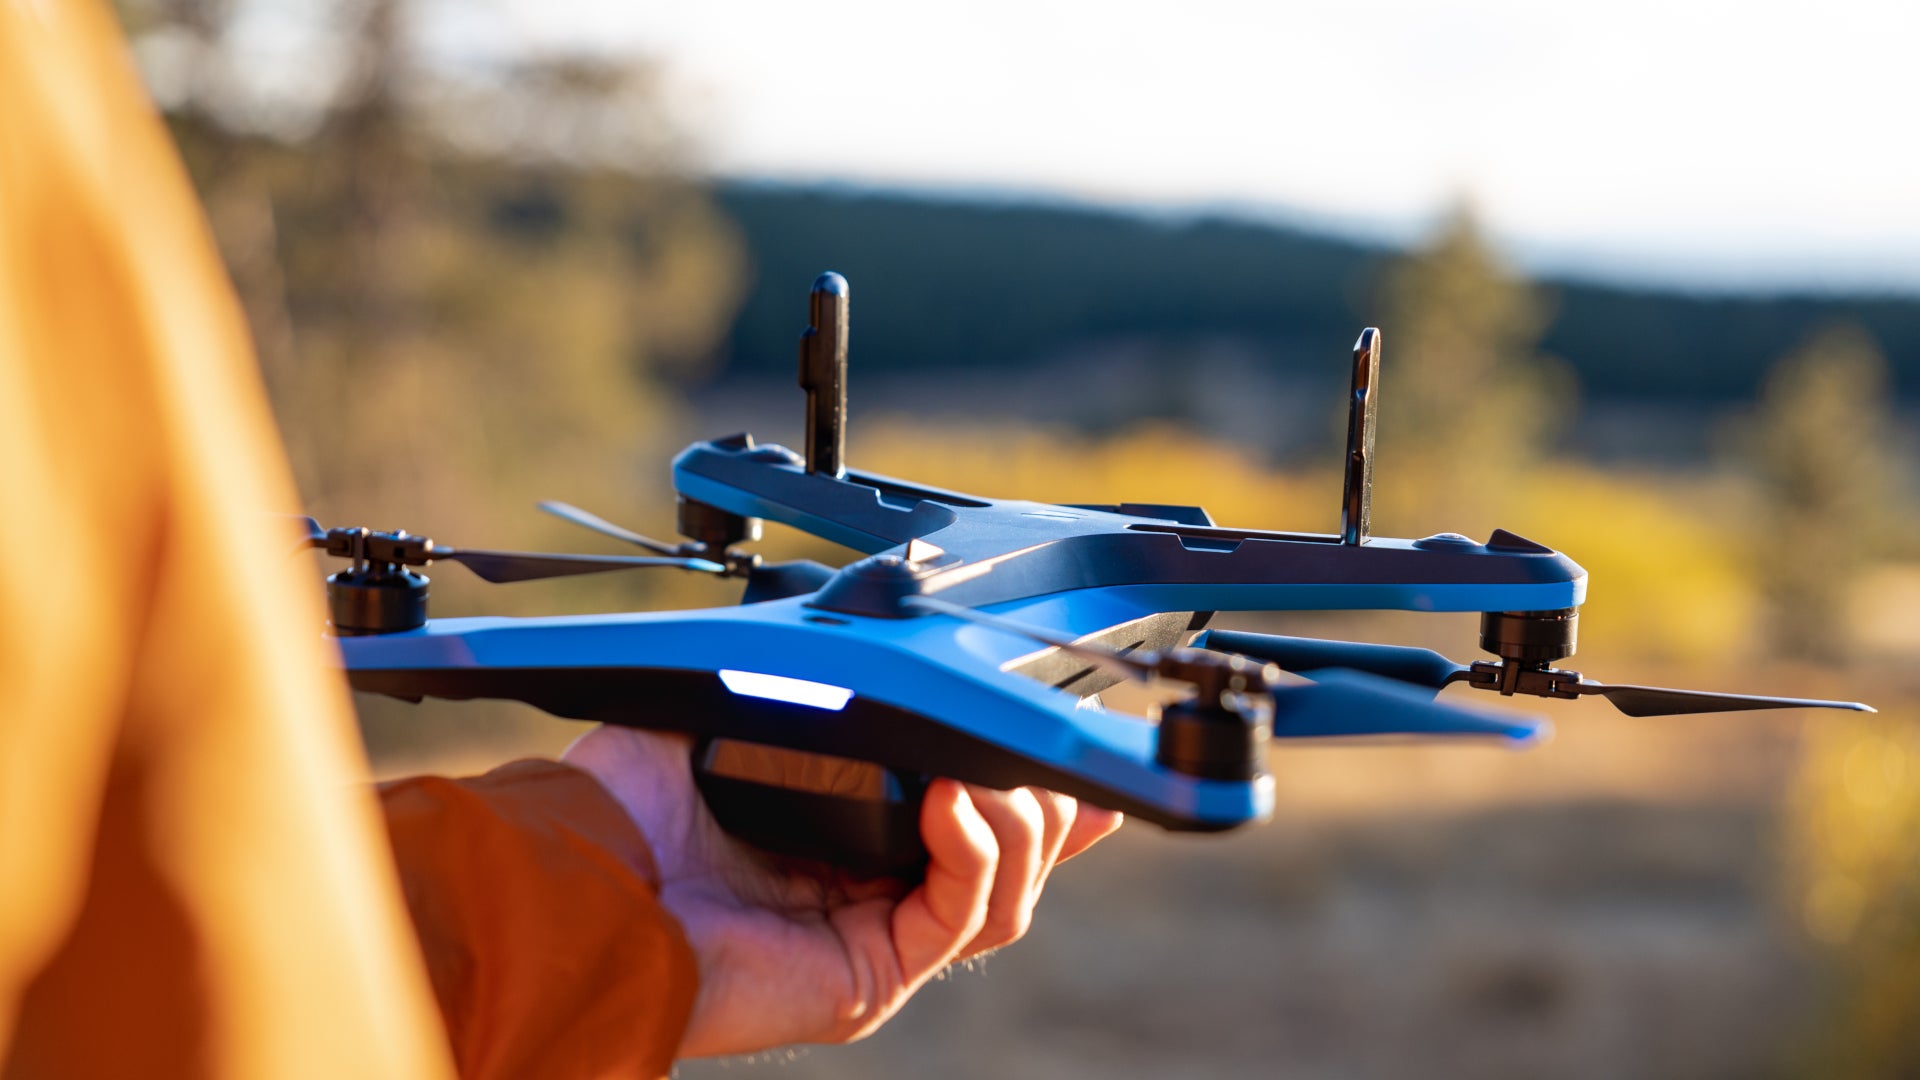 Skydio Just Shuttered Its Consumer Drone Business